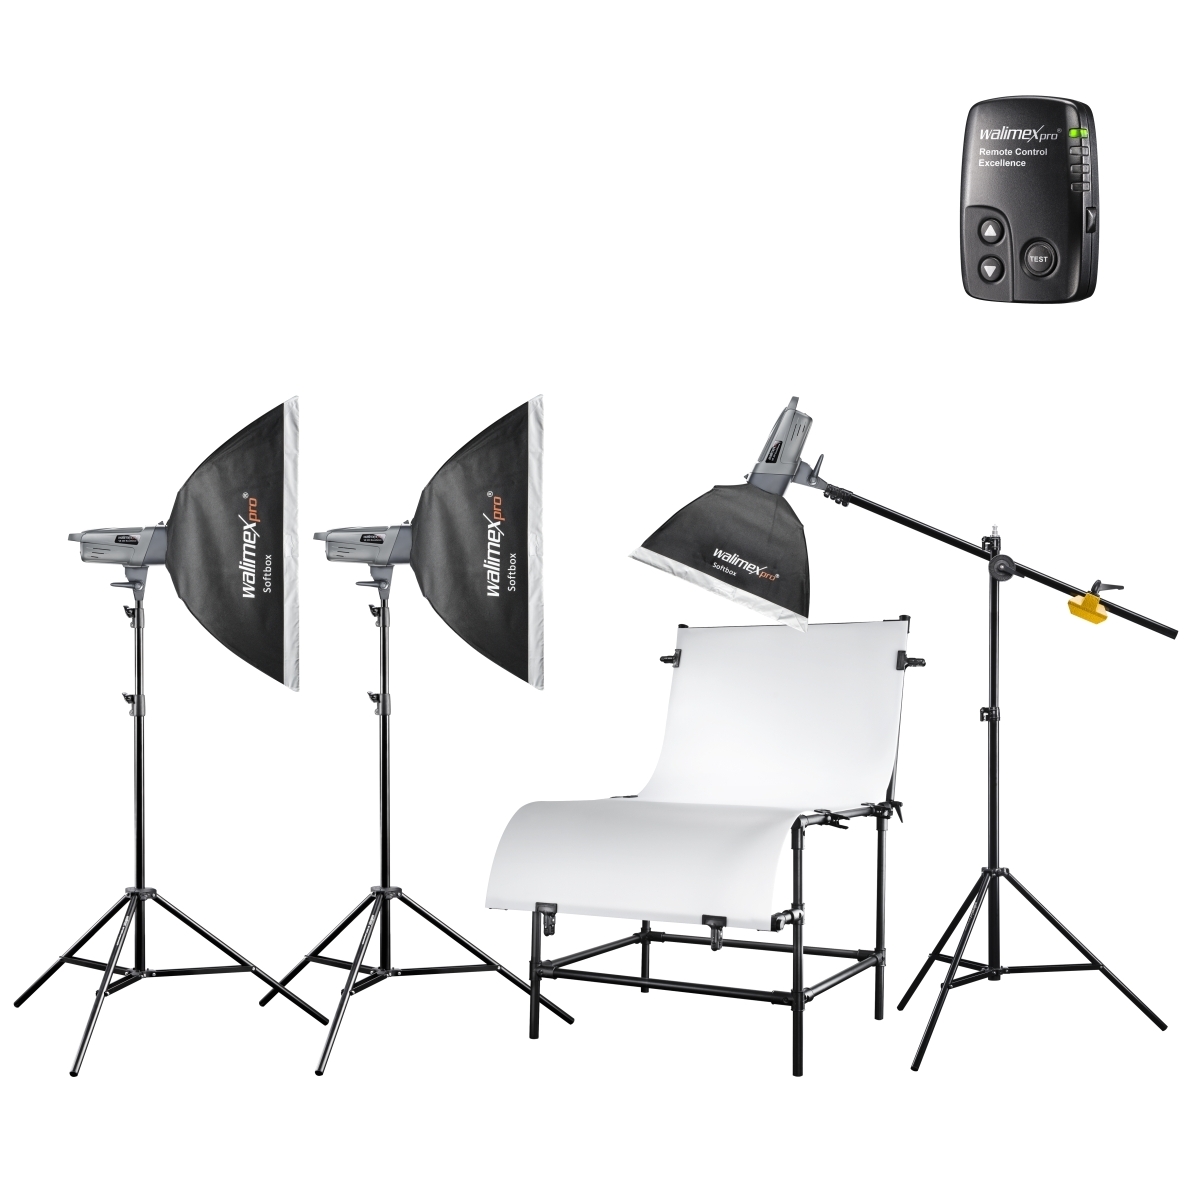 walimex per ve product photography set professional